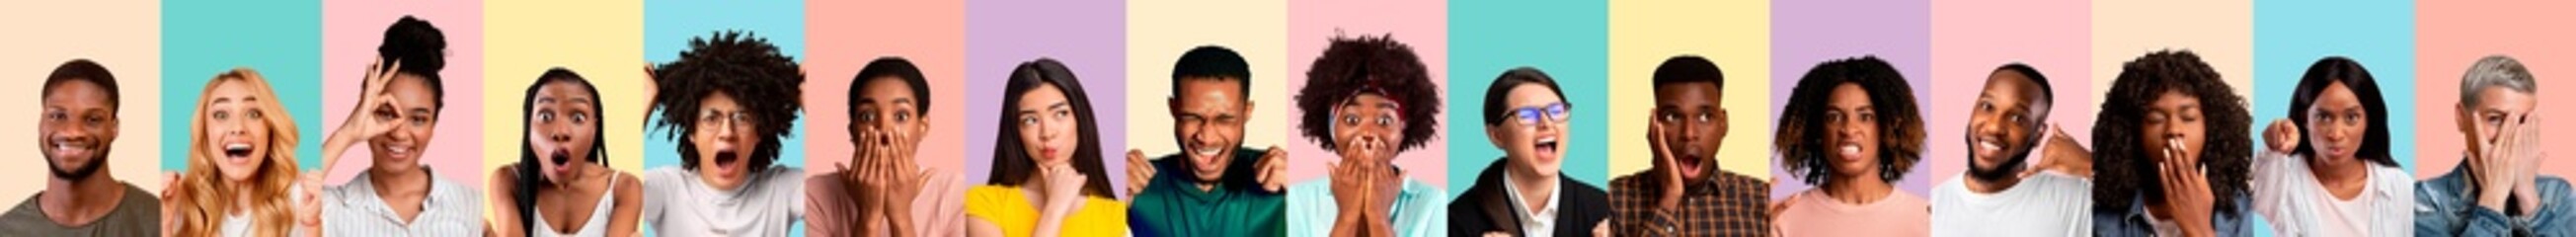 Multiracial people posing on colorful backgrounds, set of emotional photos